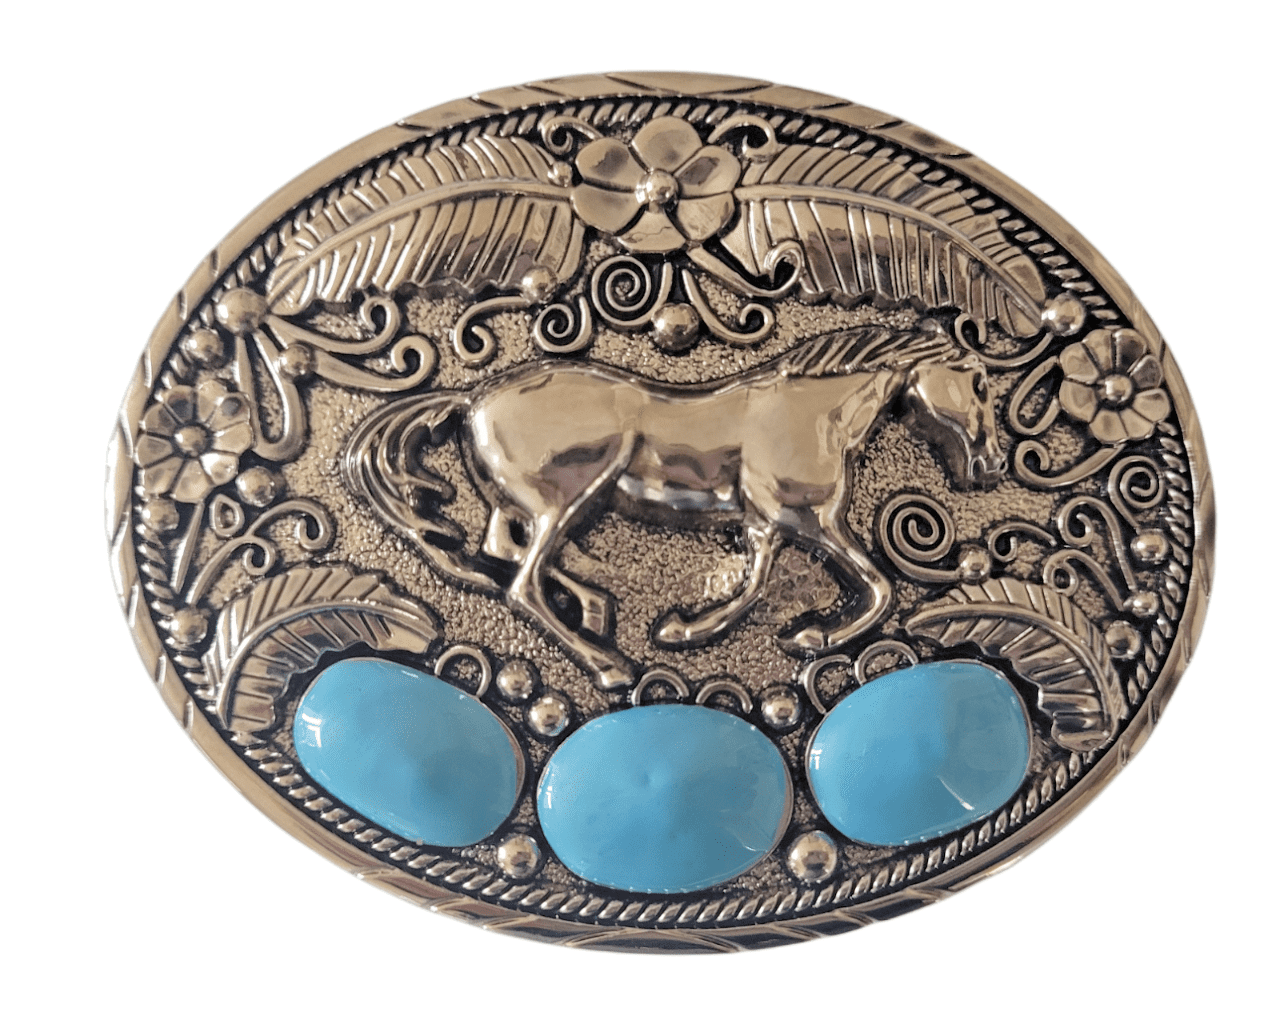 NEW HANDCRAFTED SILVER METAL BELT BUCKLE TURQUOISE COLOUR WESTERN COWBOY GOTH 